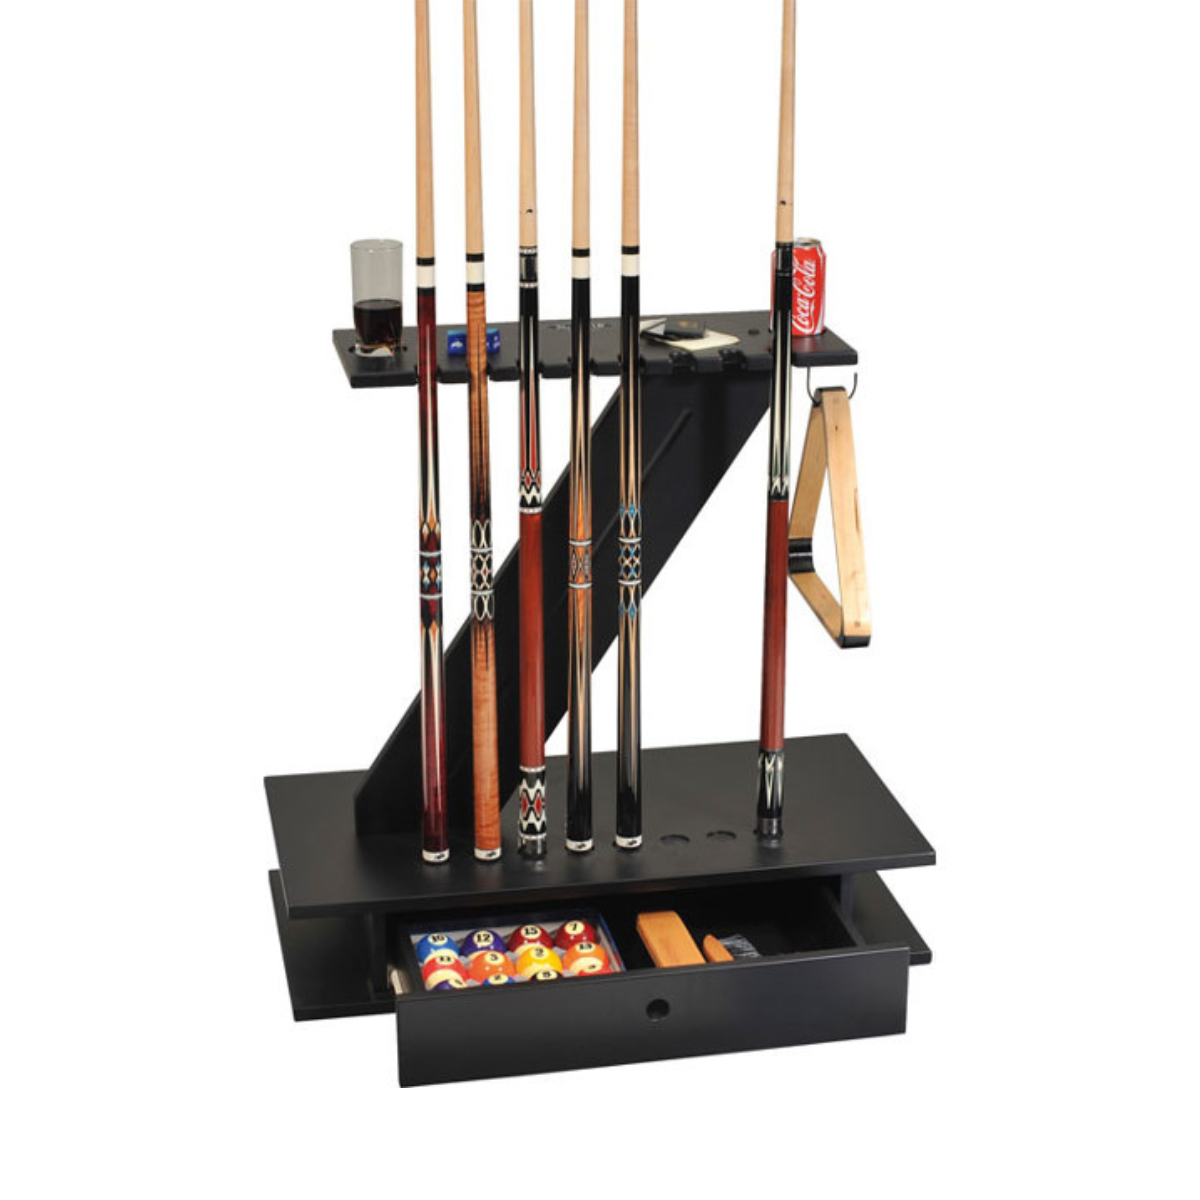 The Z Pool & Snooker Cue Stand